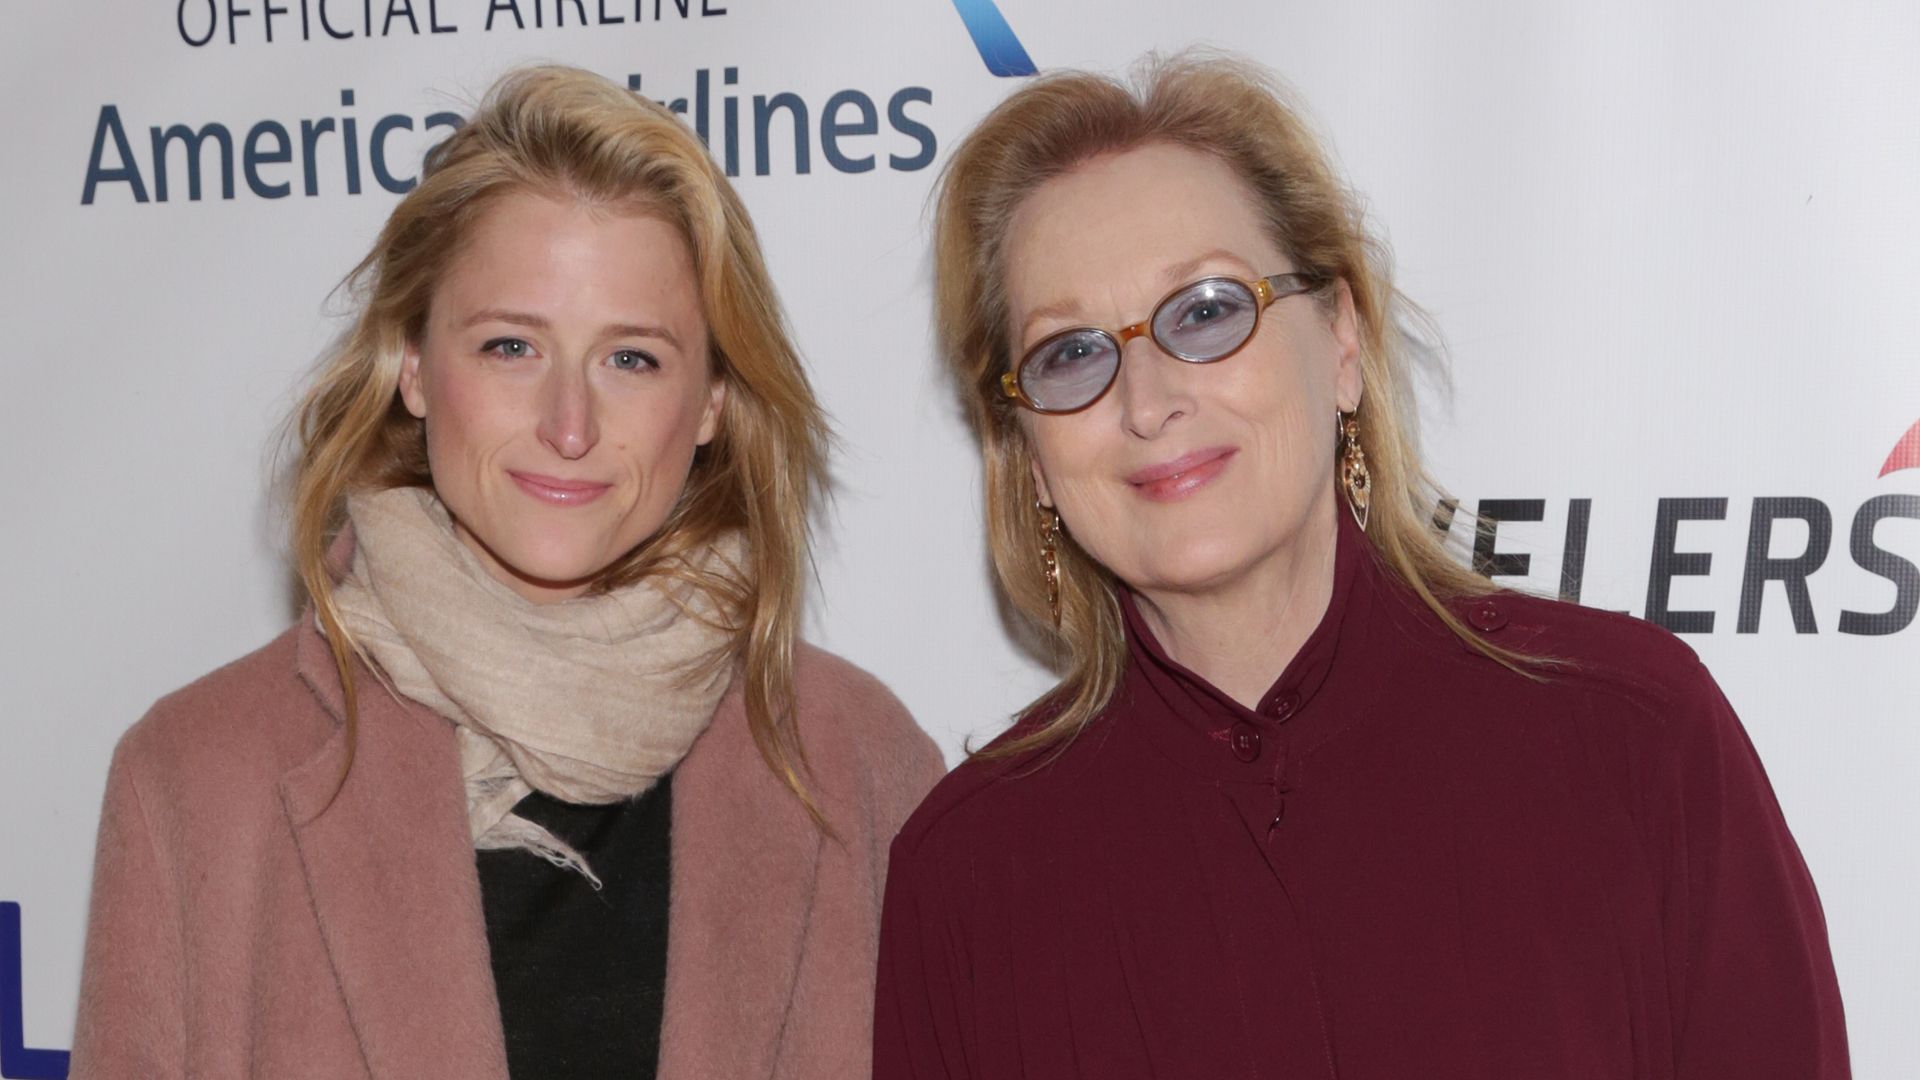 Mamie Gummer and Meryl Streep attend the Citymeals-On-Wheels Power Lunch for Women held at The Plaza Hotel on November 20, 2015 in New York City